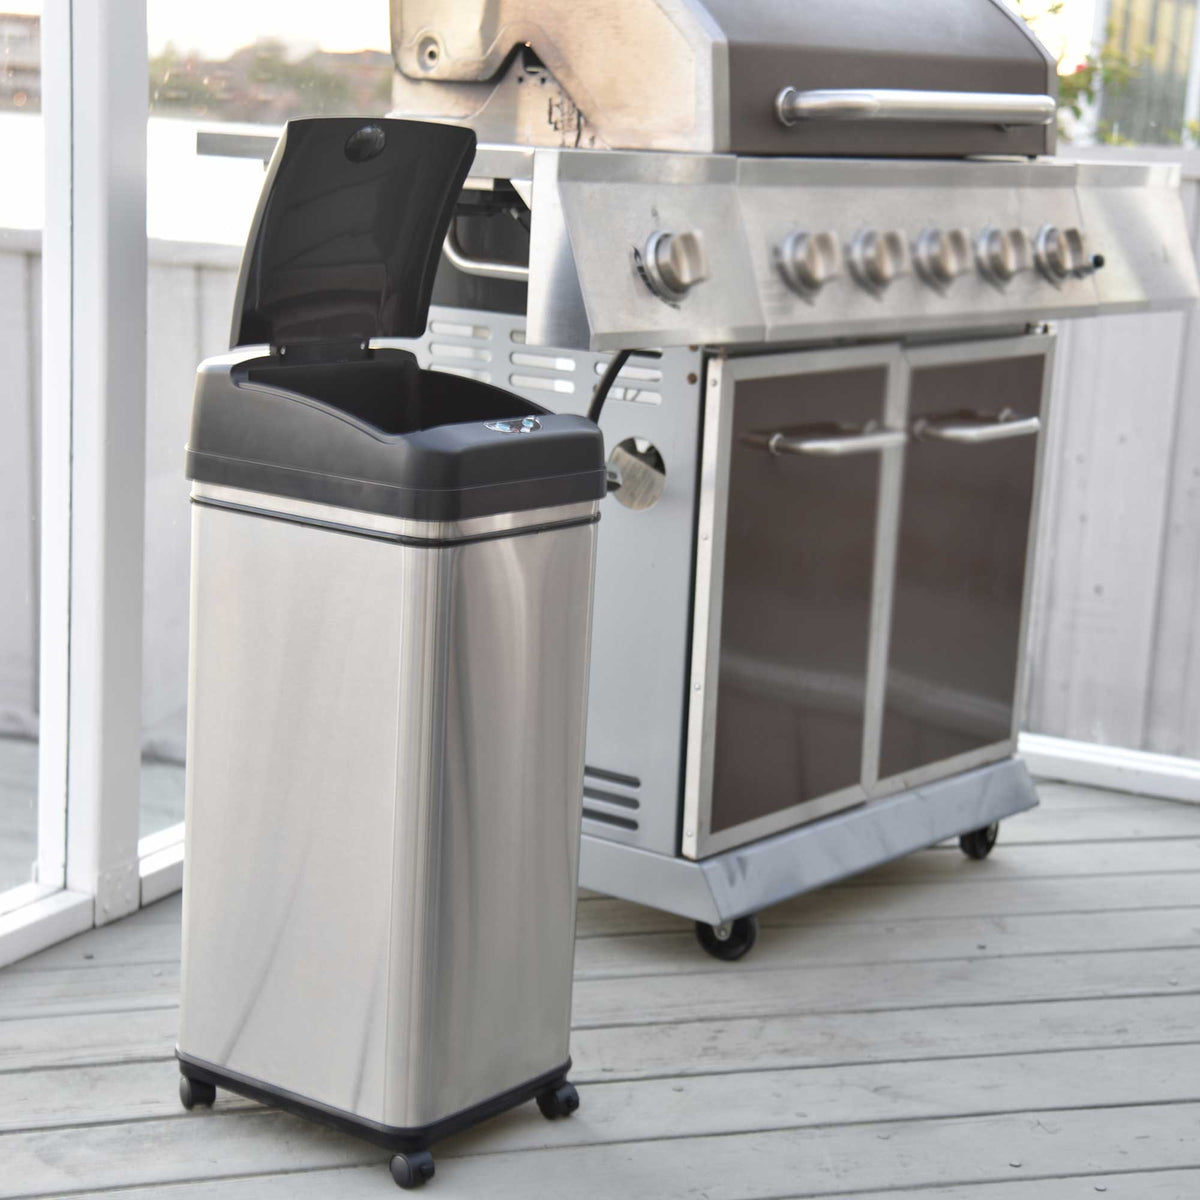 iTouchless Stainless Steel Trash Can with wheels in the backyard